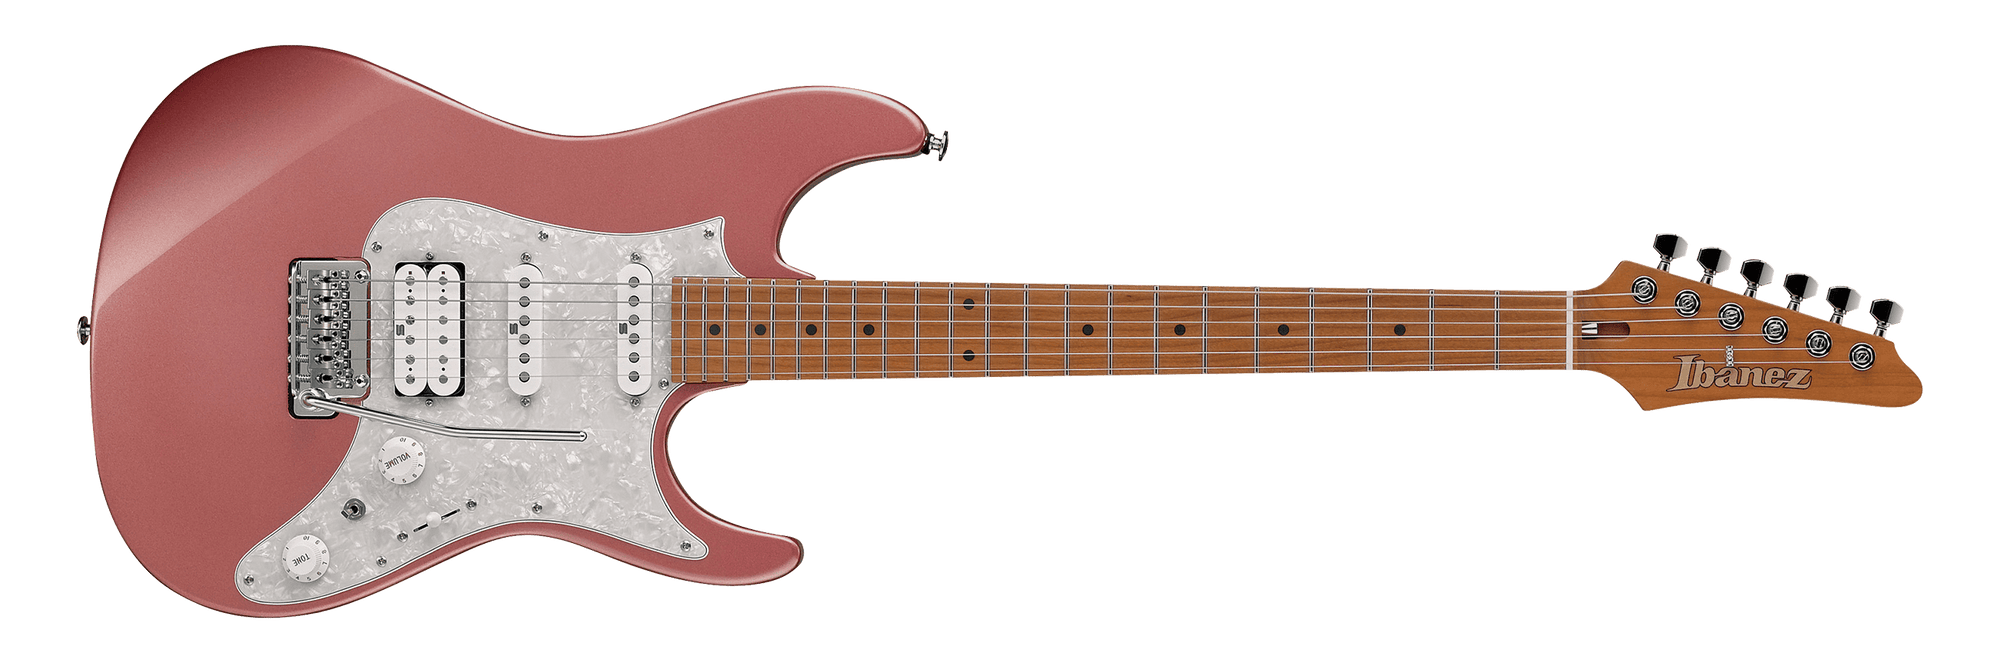 Ibanez Prestige Roasted Maple Neck with Seympur Duncan Hyperion and Hardshell case in Hazy Rose Metallic - The Guitar World